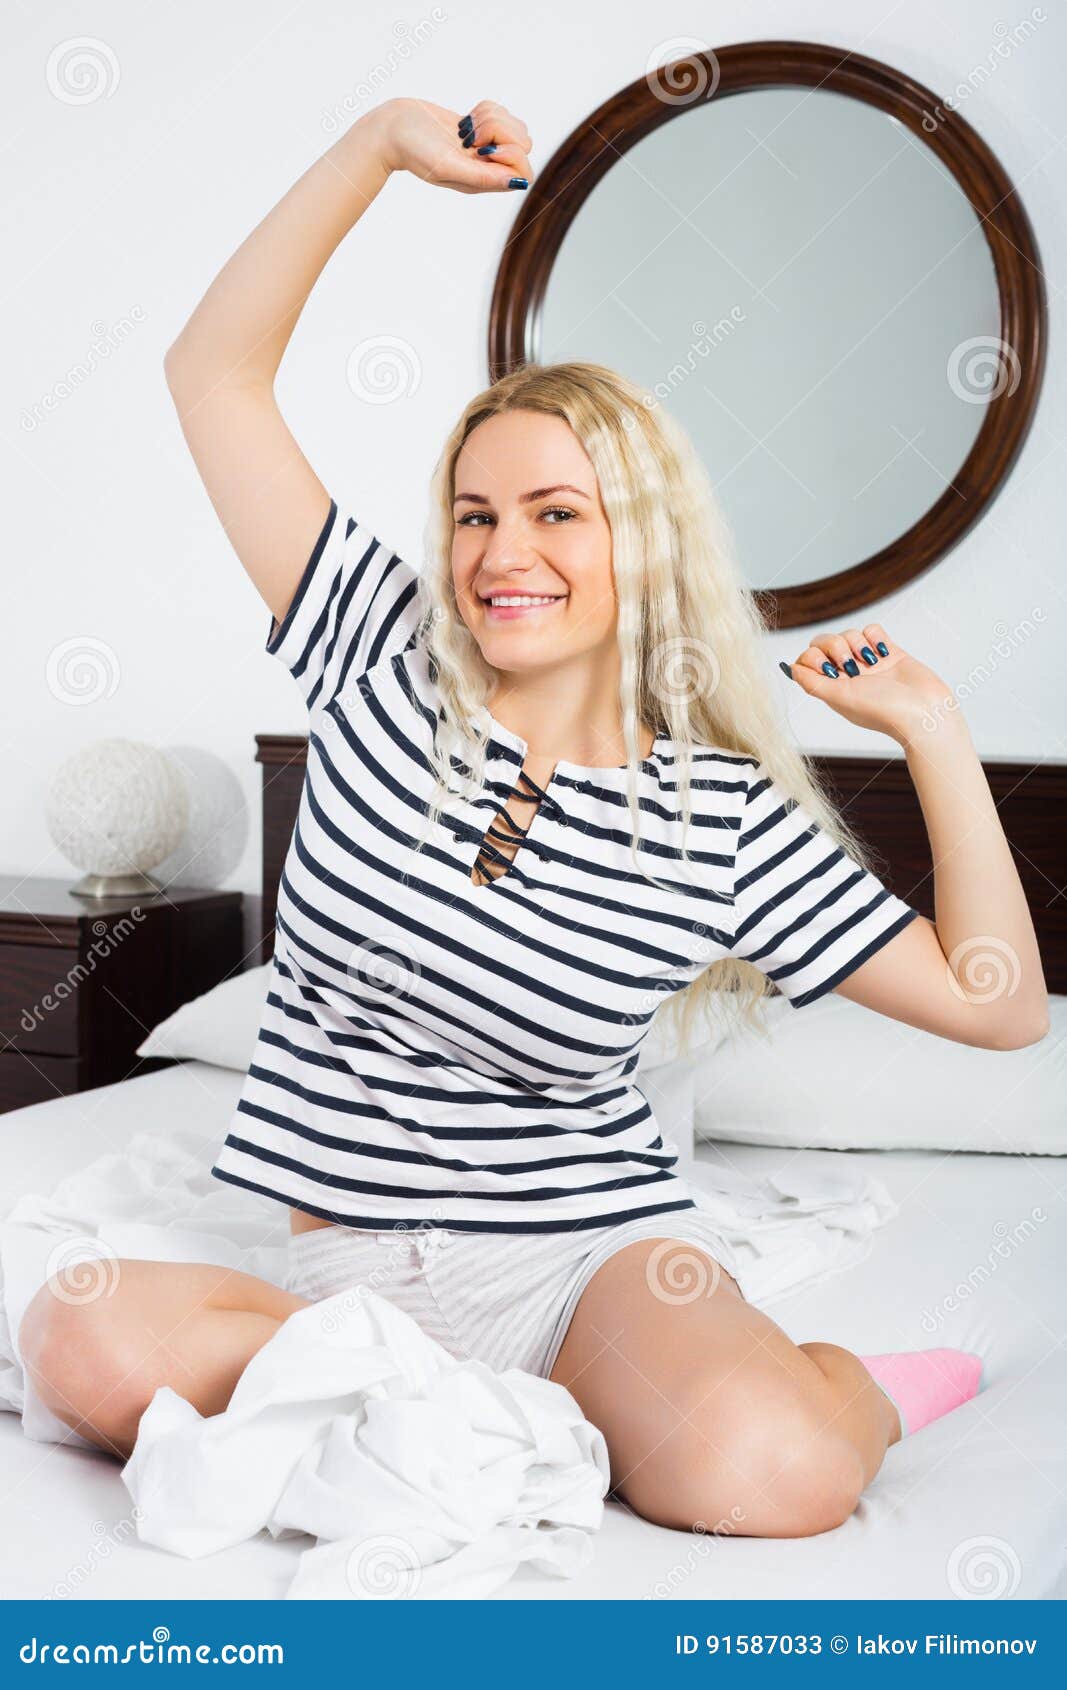 cheerful young woman with long hair awaking